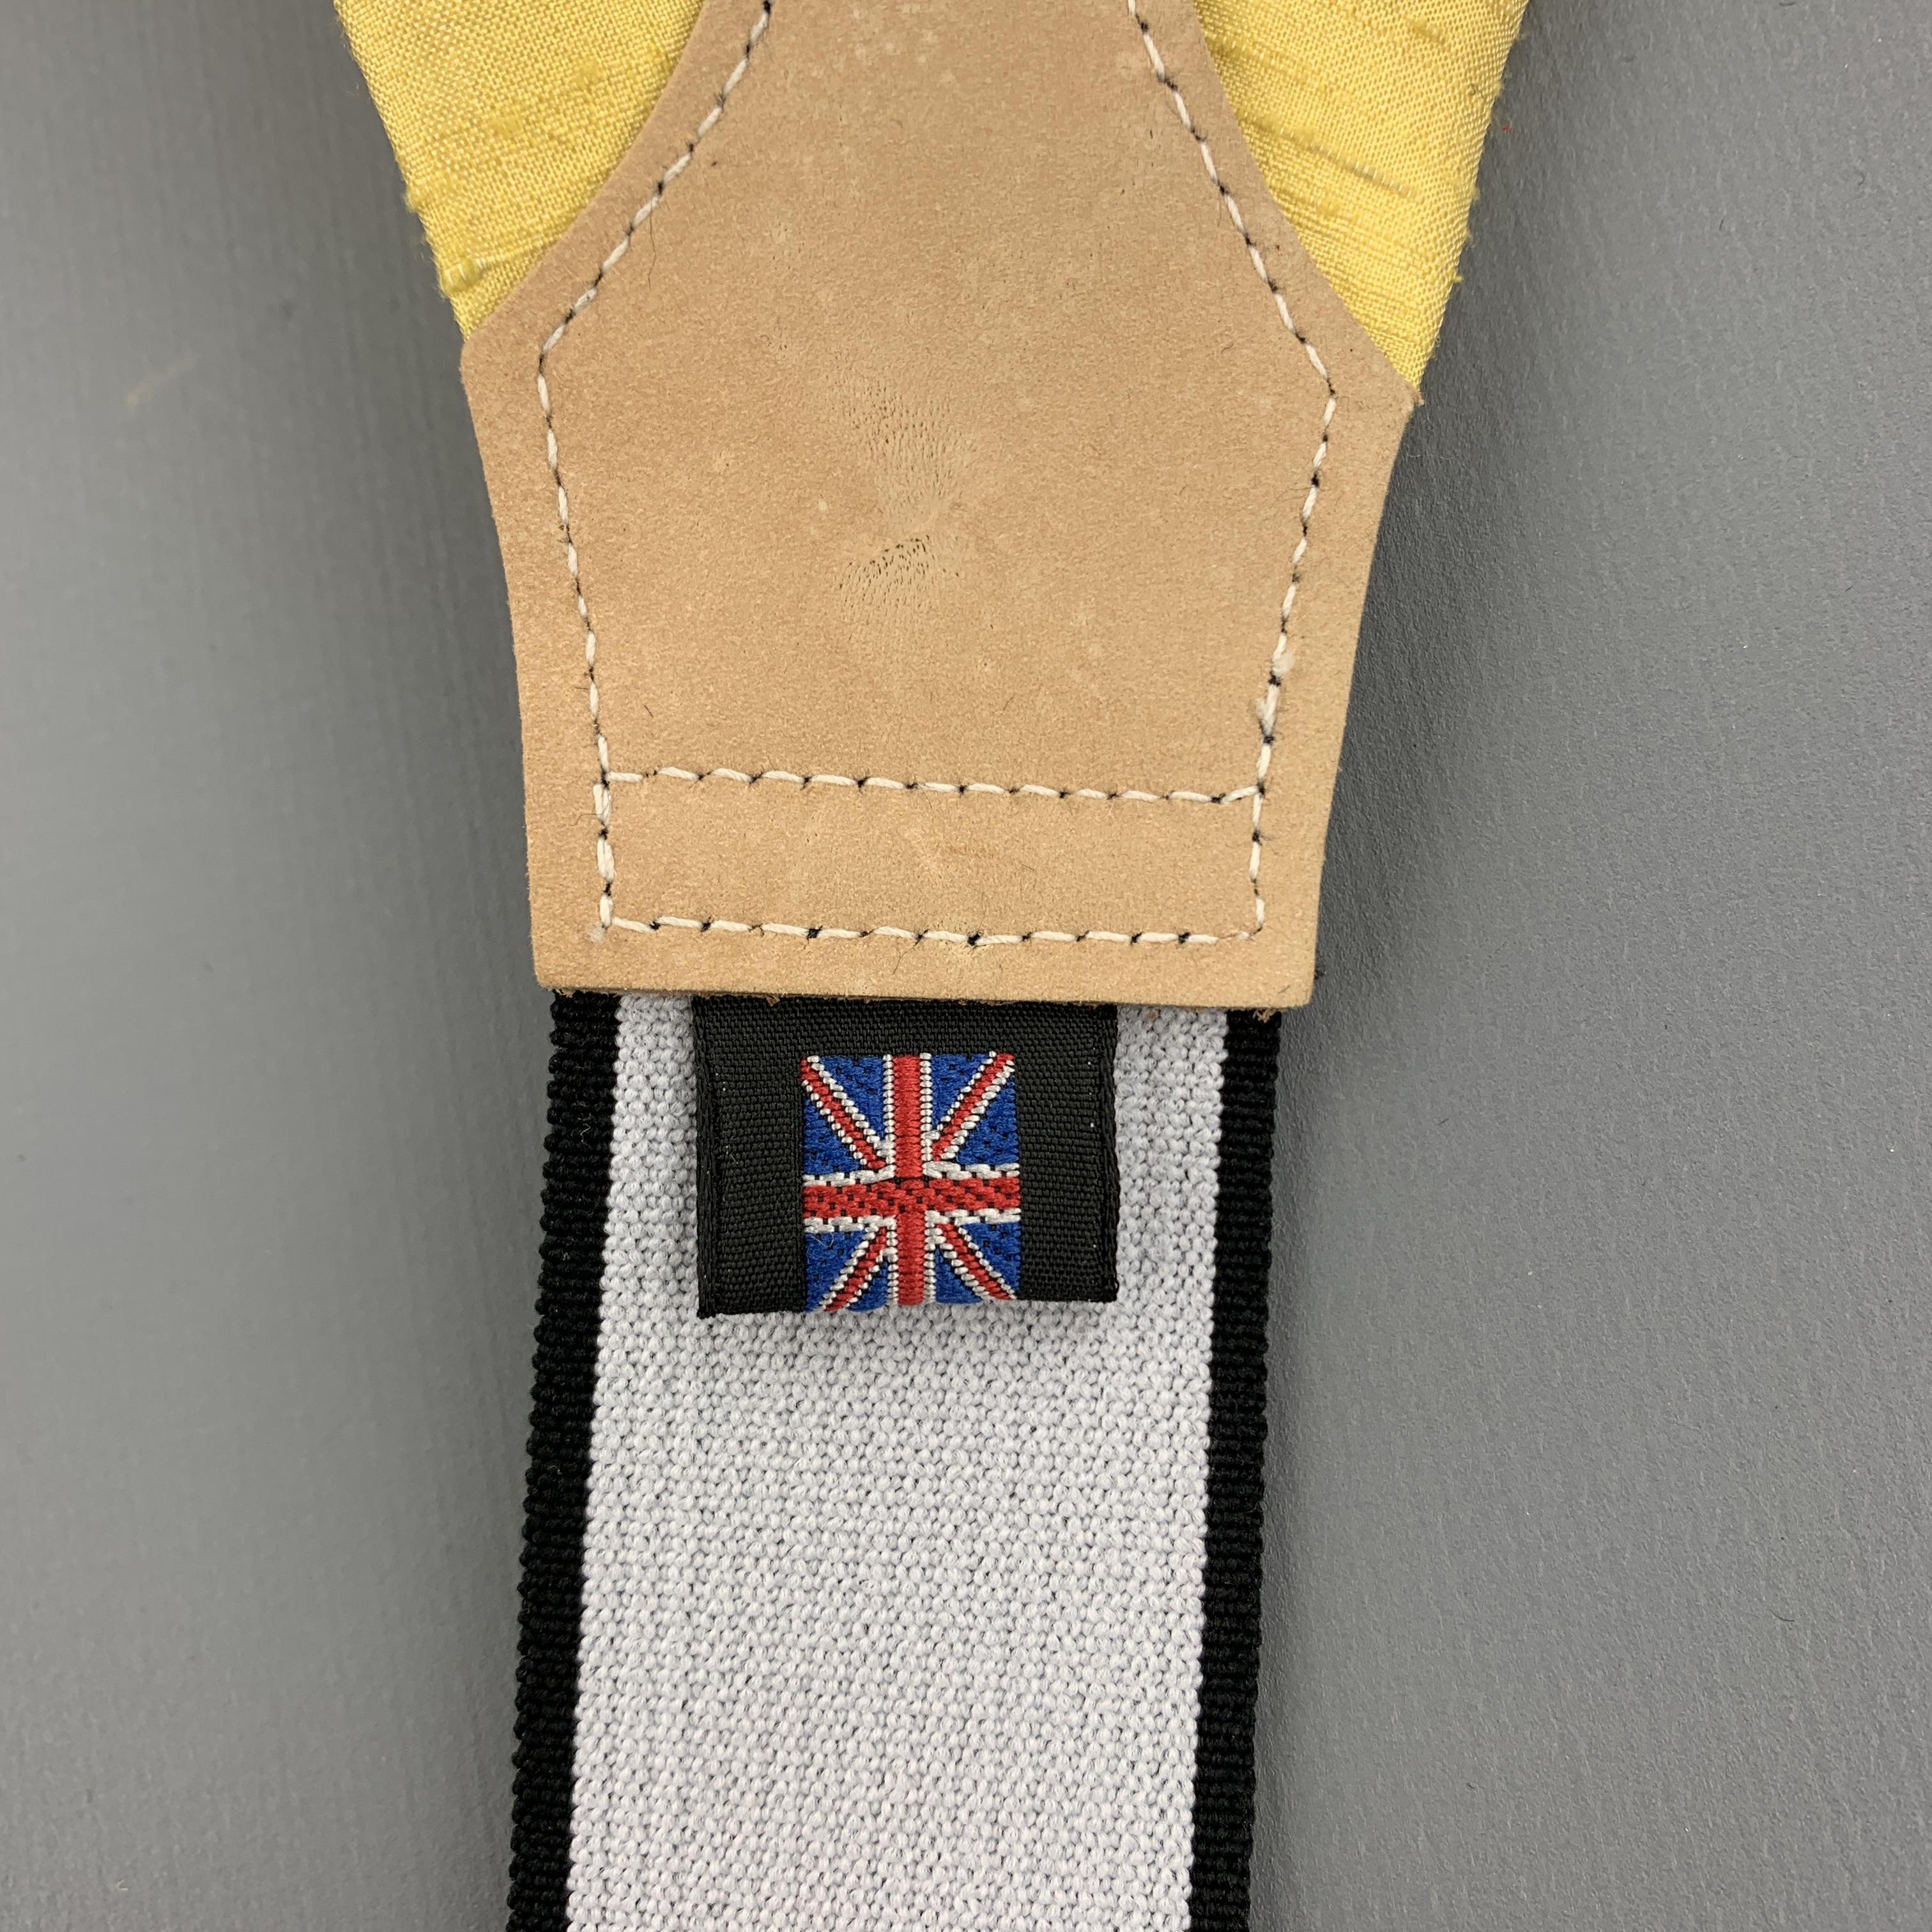 turnbull and asser suspenders